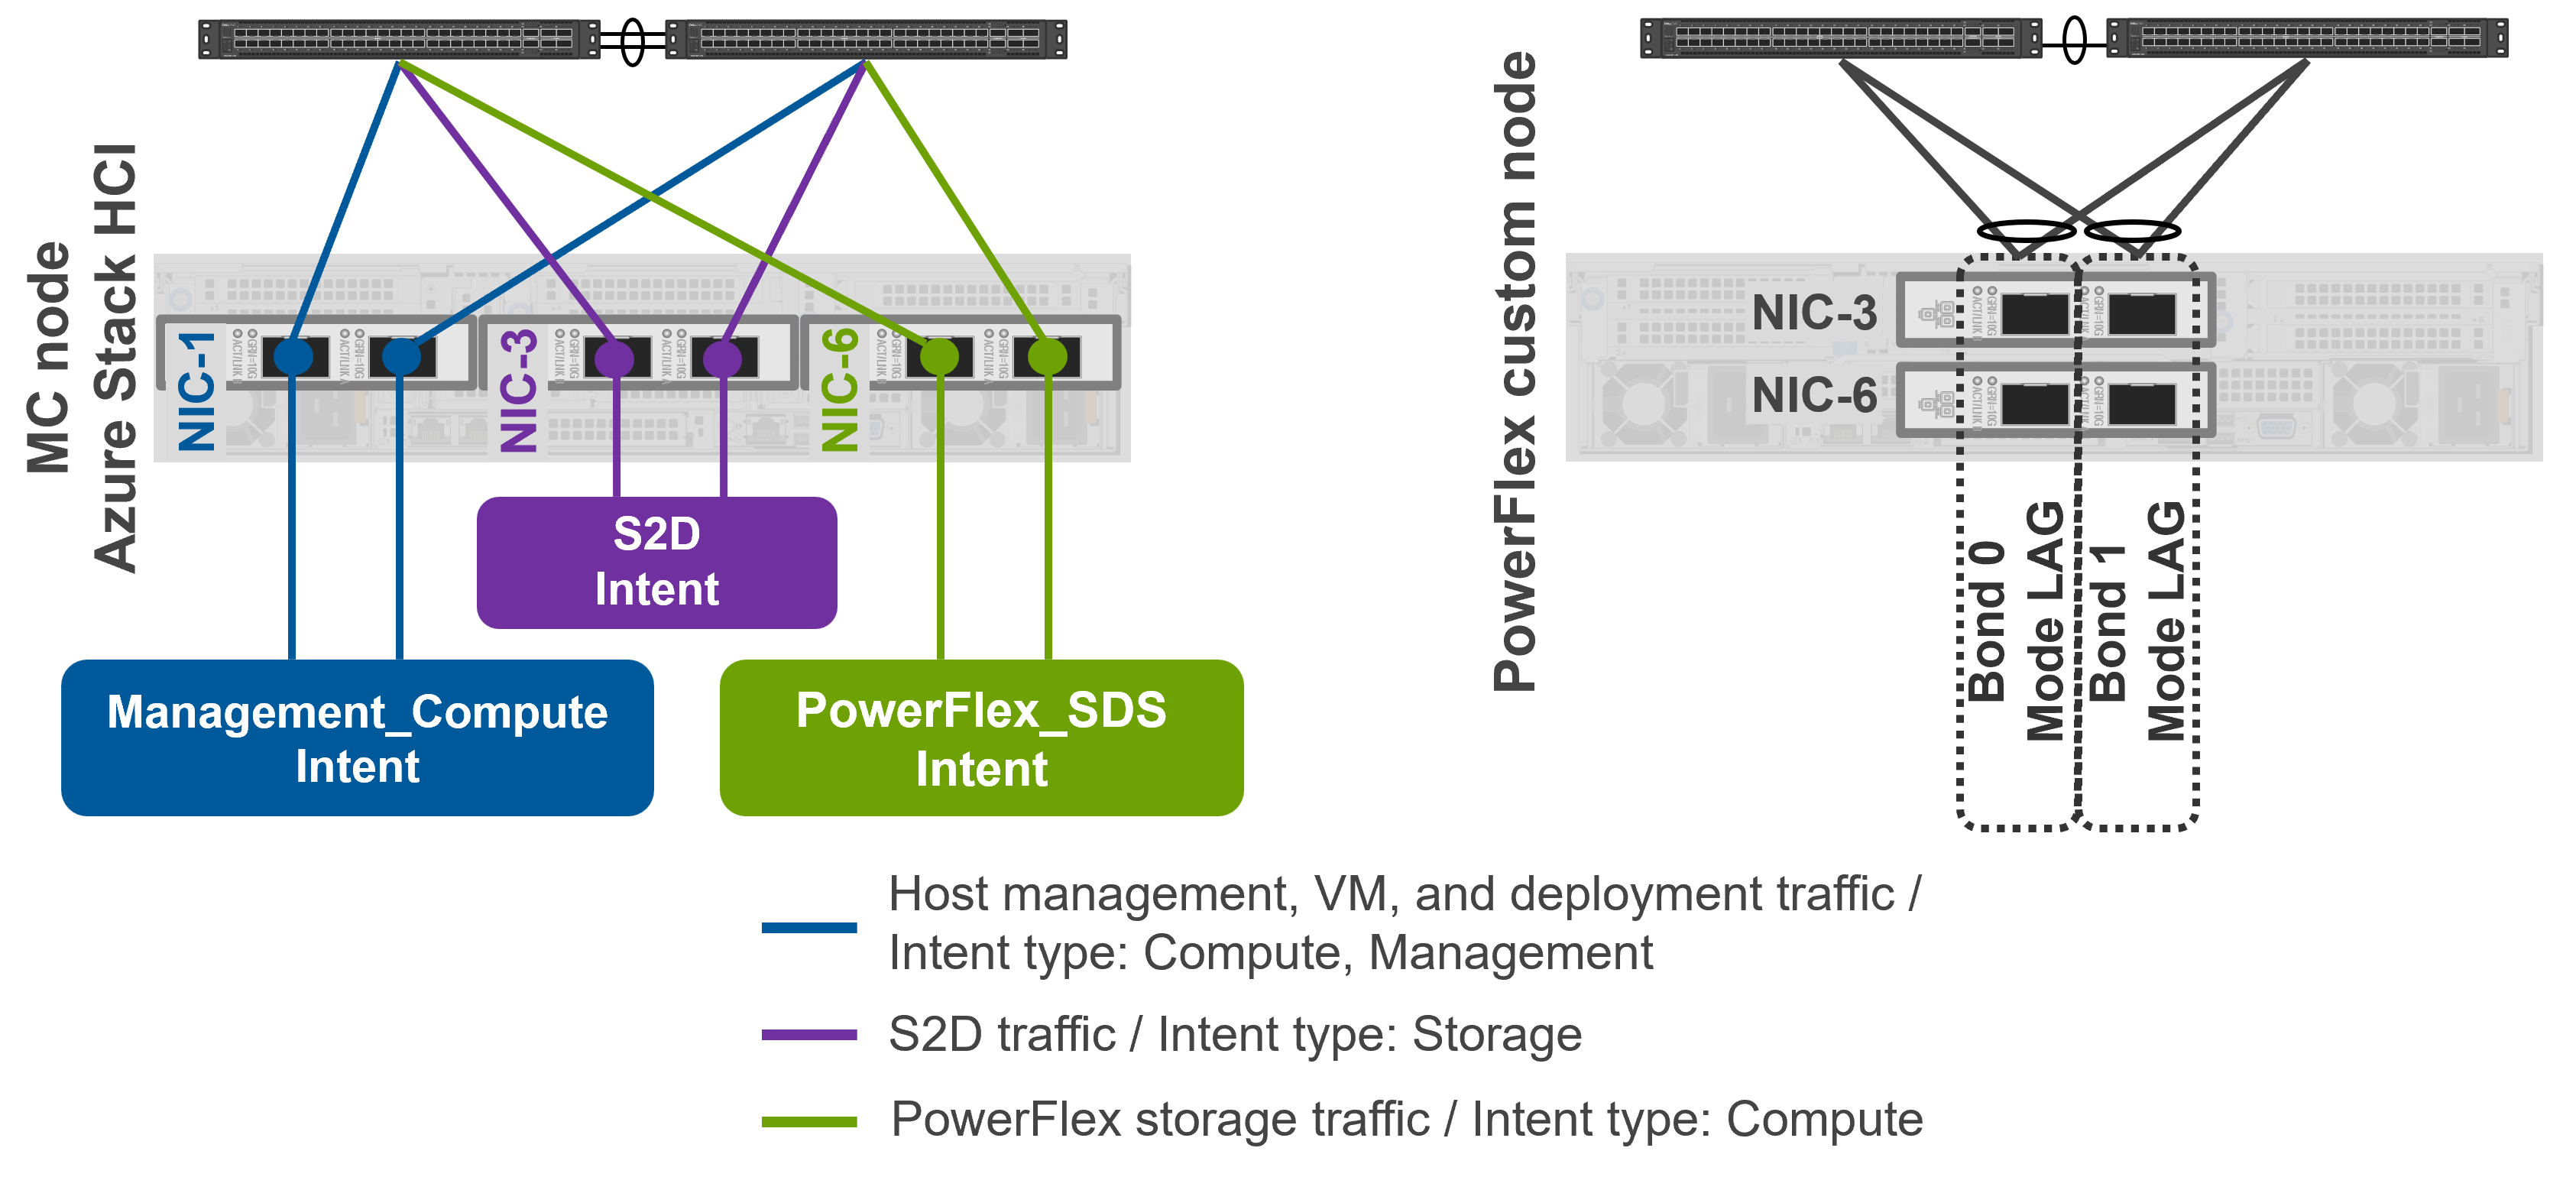 Illustration showing the host networking that was setup for the validation.